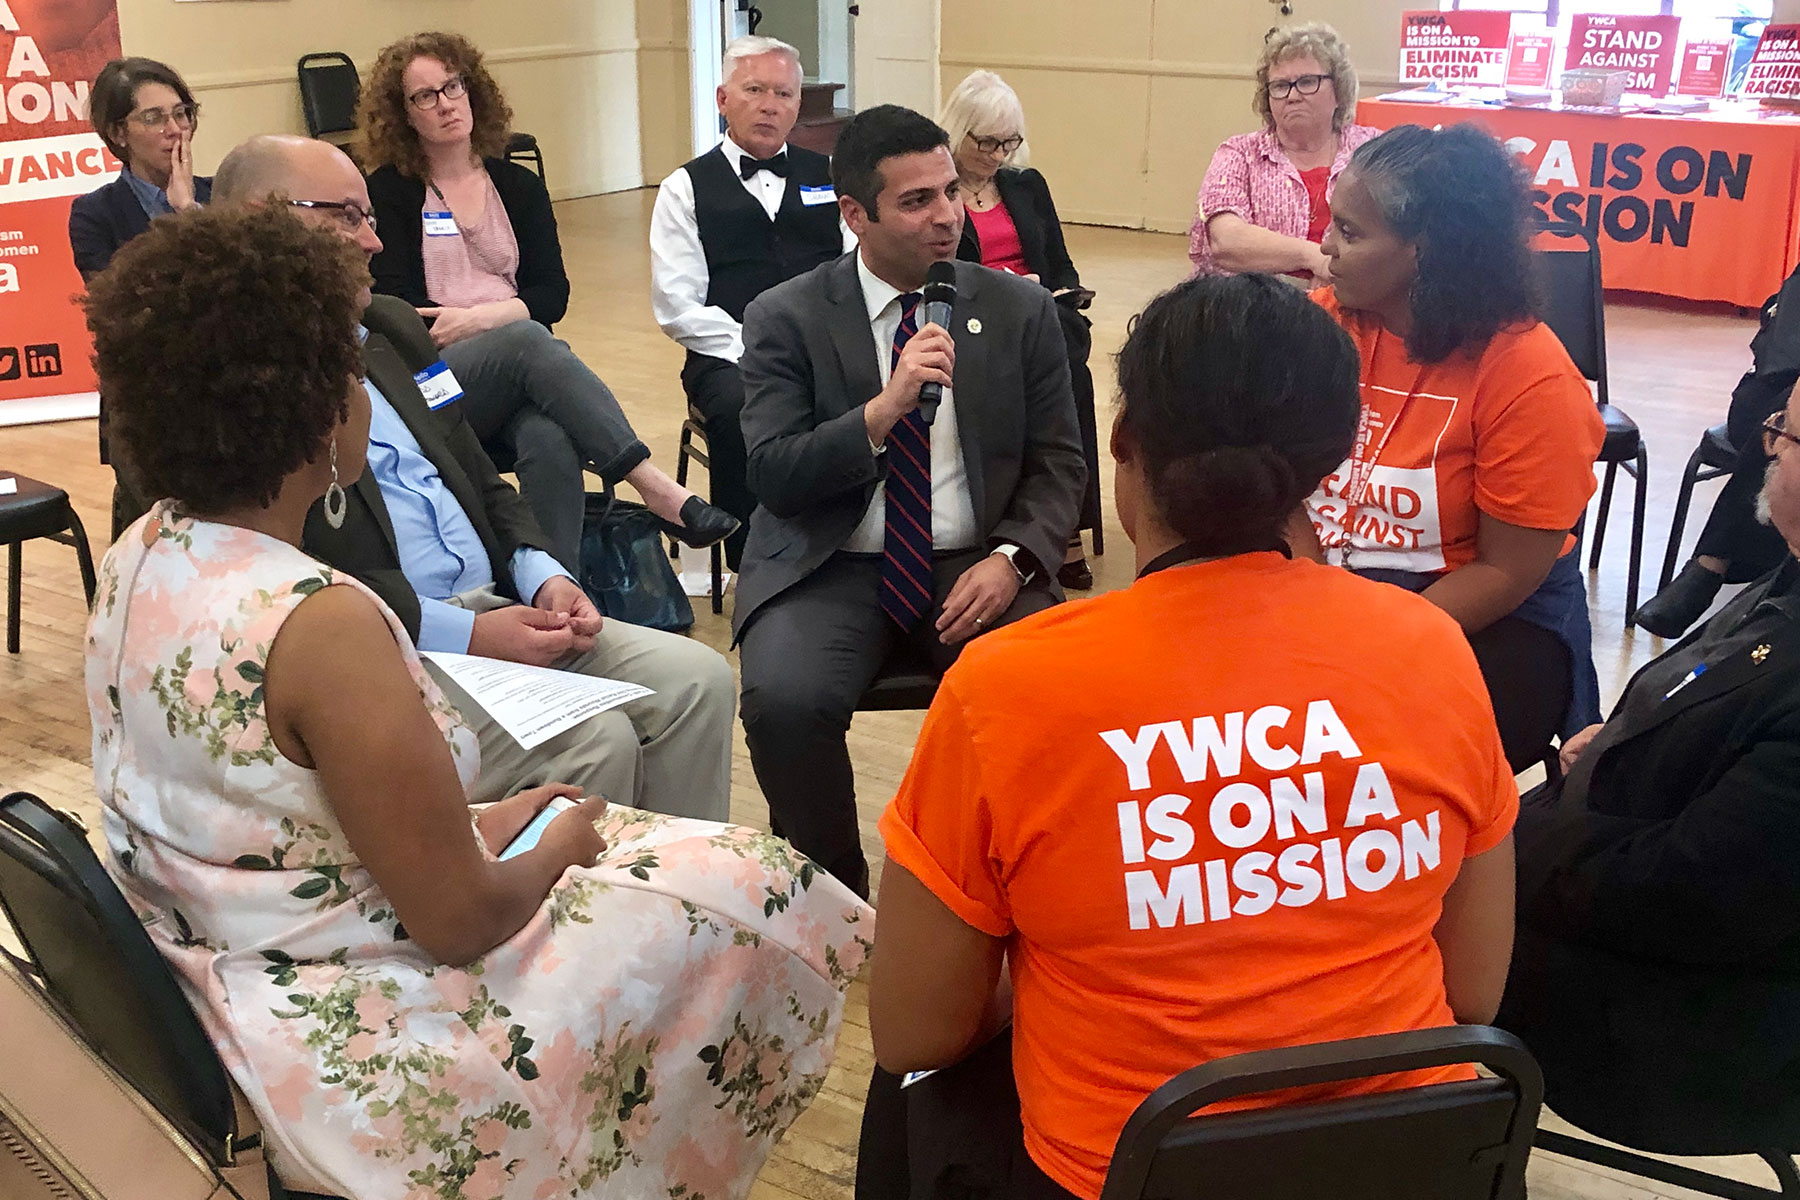 YWCA Glendale Stand Against Racism Event 2019